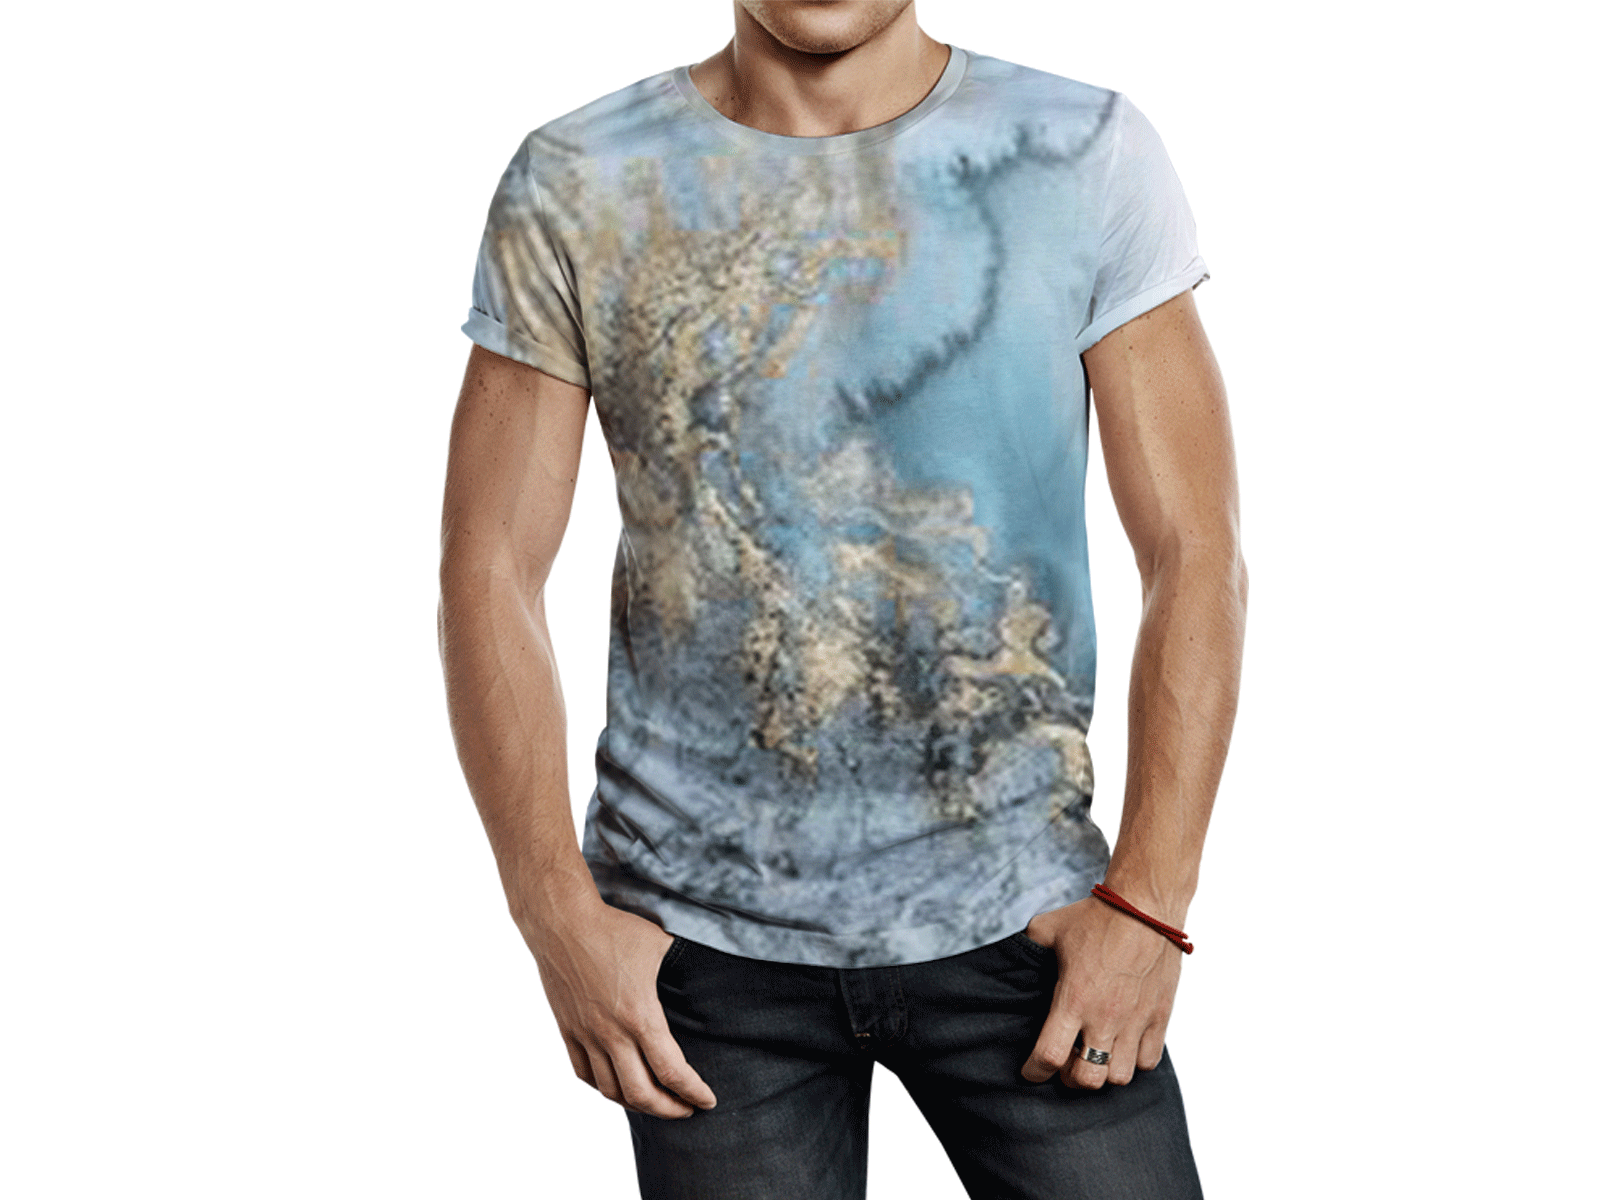 MarbleTexture Background T shirt Design 2 by Design Store on Dribbble